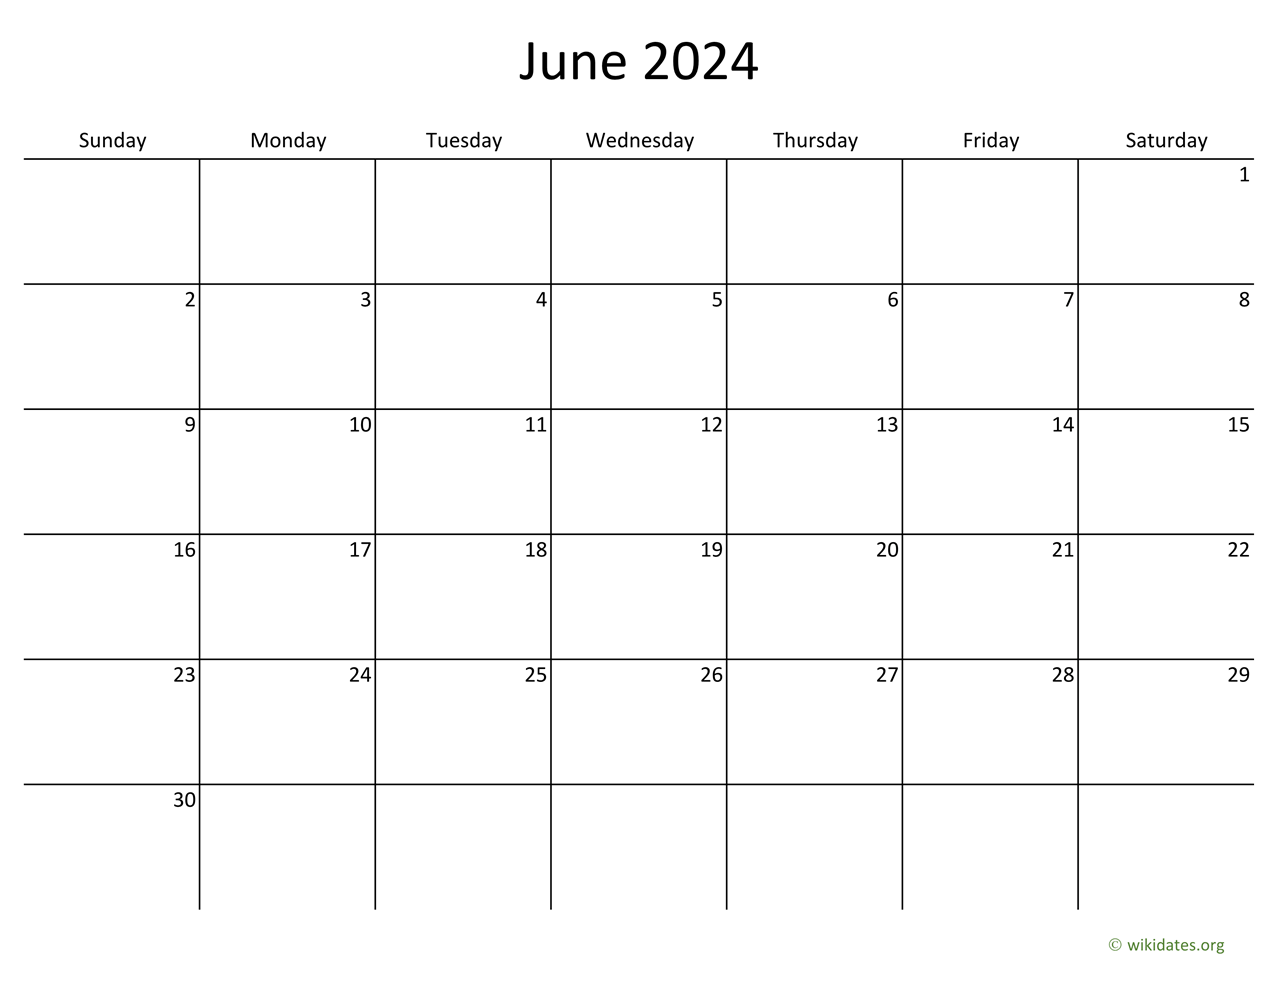 June 2024 Calendar with Bigger boxes | WikiDates.org